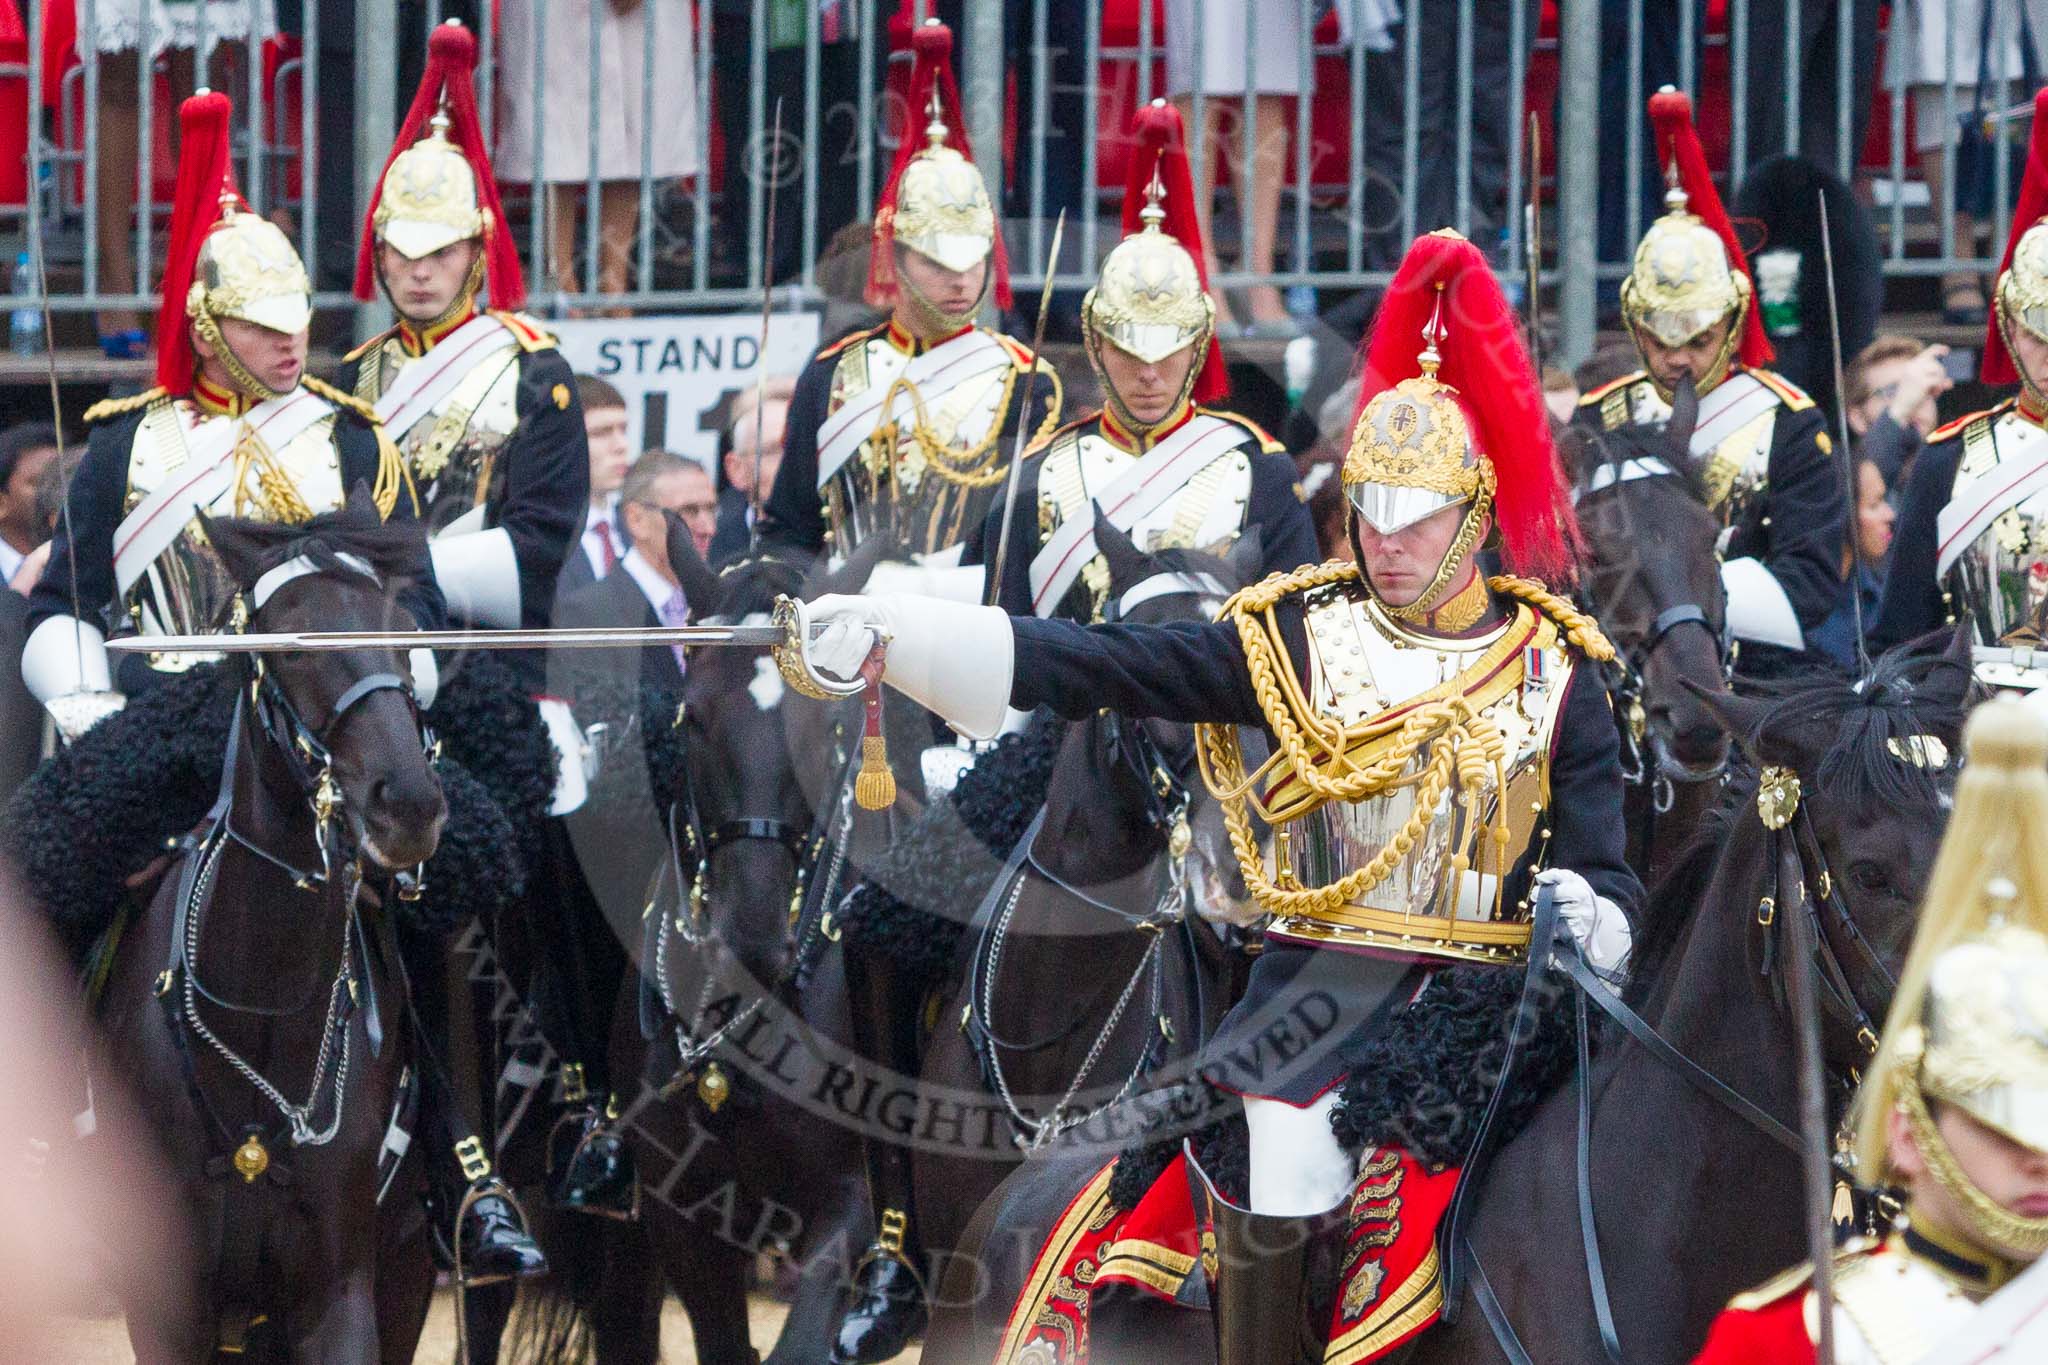 Trooping the Colour 2015. Image #557, 13 June 2015 11:54 Horse Guards Parade, London, UK